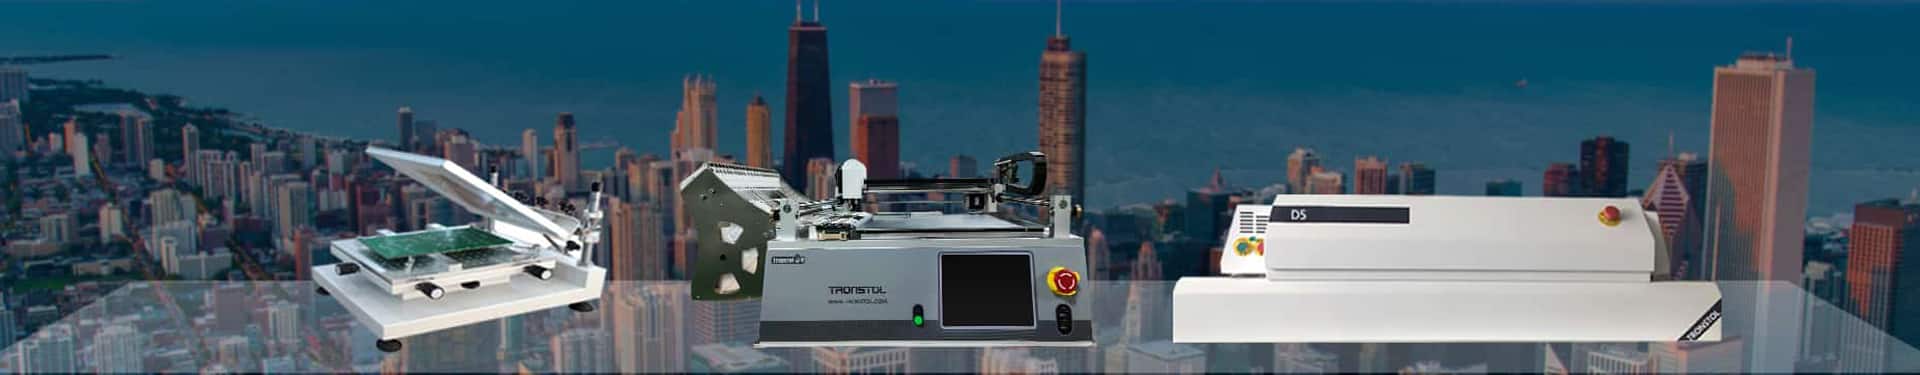 Tronstol 3V (Advanced) Pick and Place Machine Line12